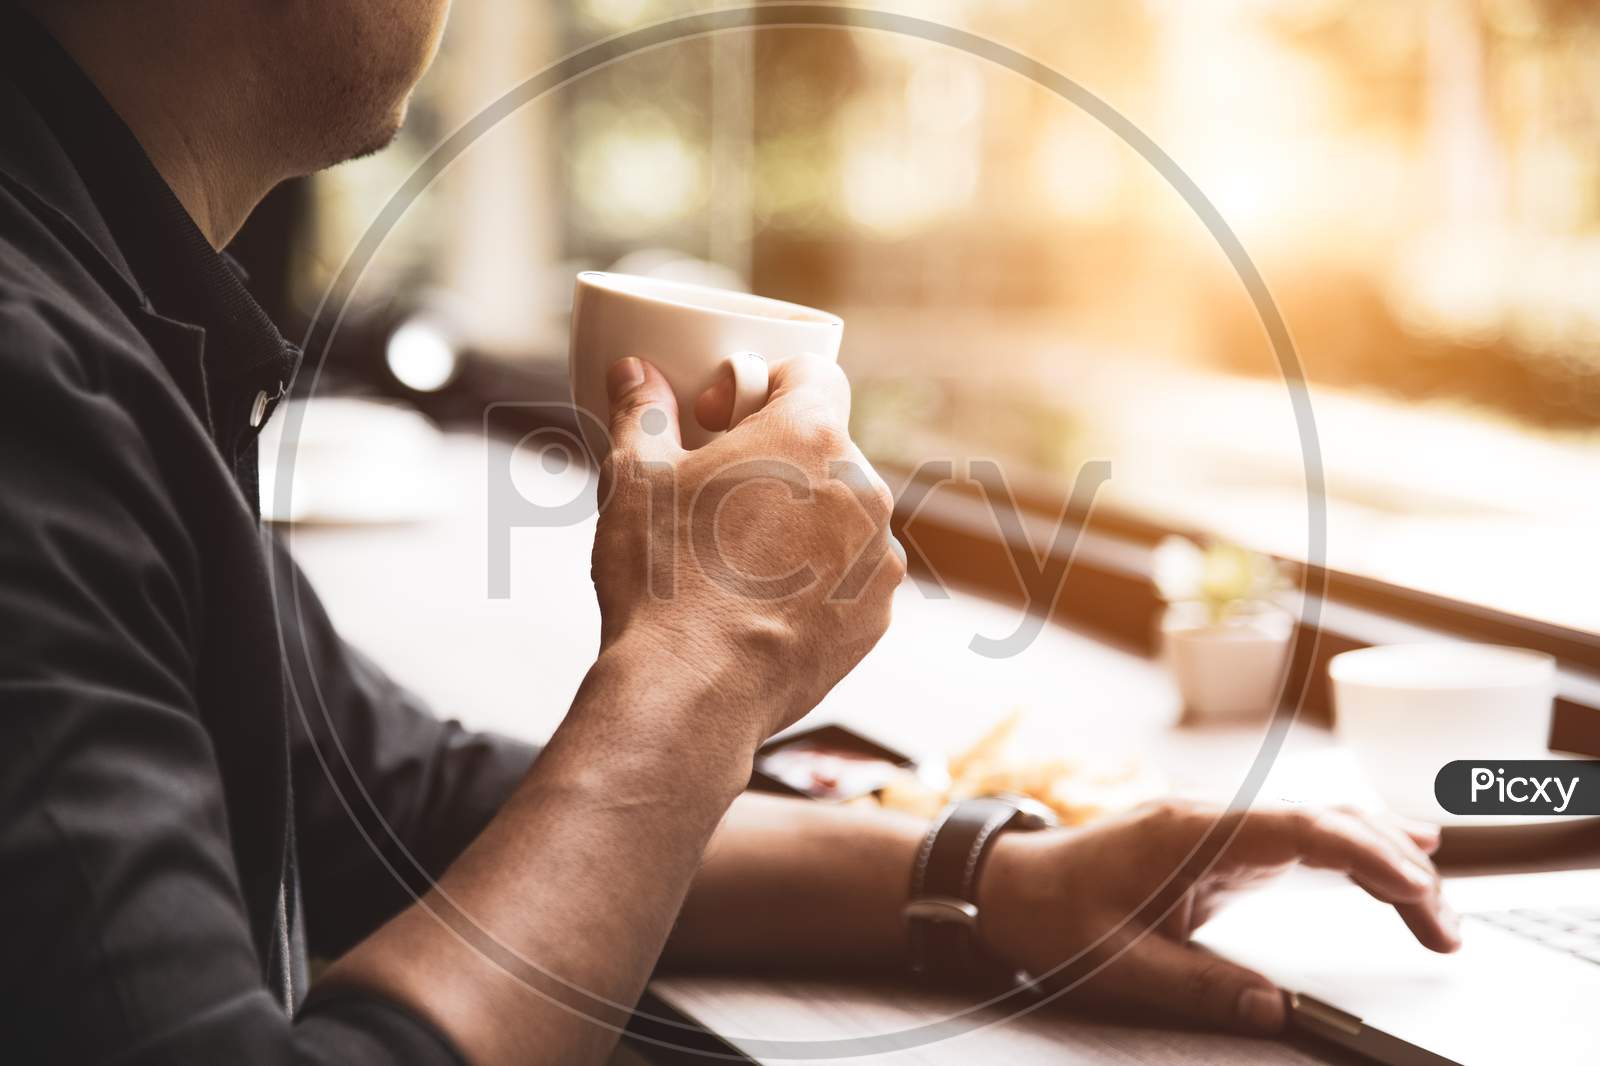 Close Up Of Coffee Cup On Businessman Hand. Man Working With Laptop Computer. Business And Technology Concept. Workaholics And Overnight Theme. Drinks And Relaxation Theme.